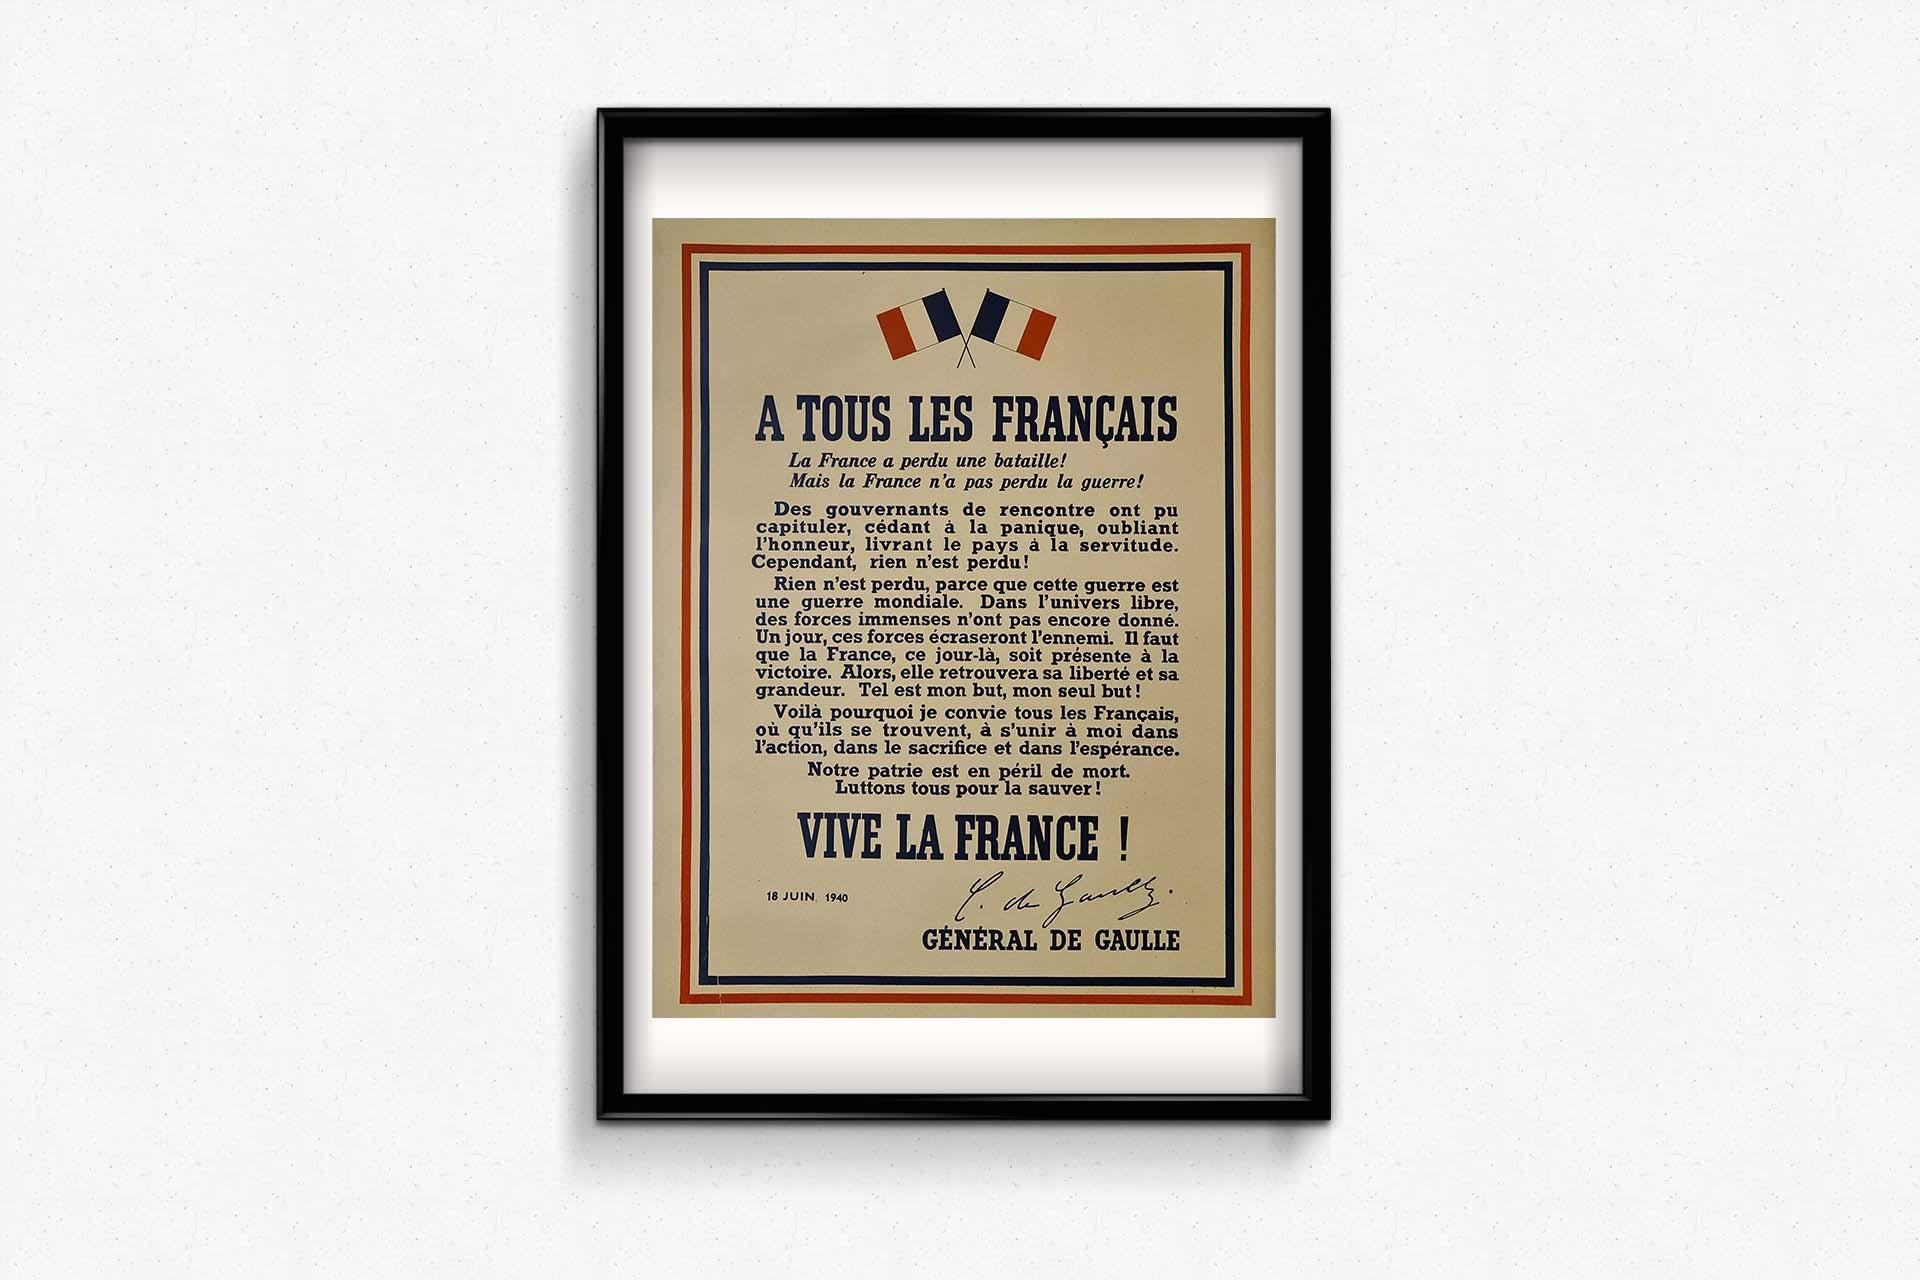 In 1940, Charles de Gaulle's iconic 